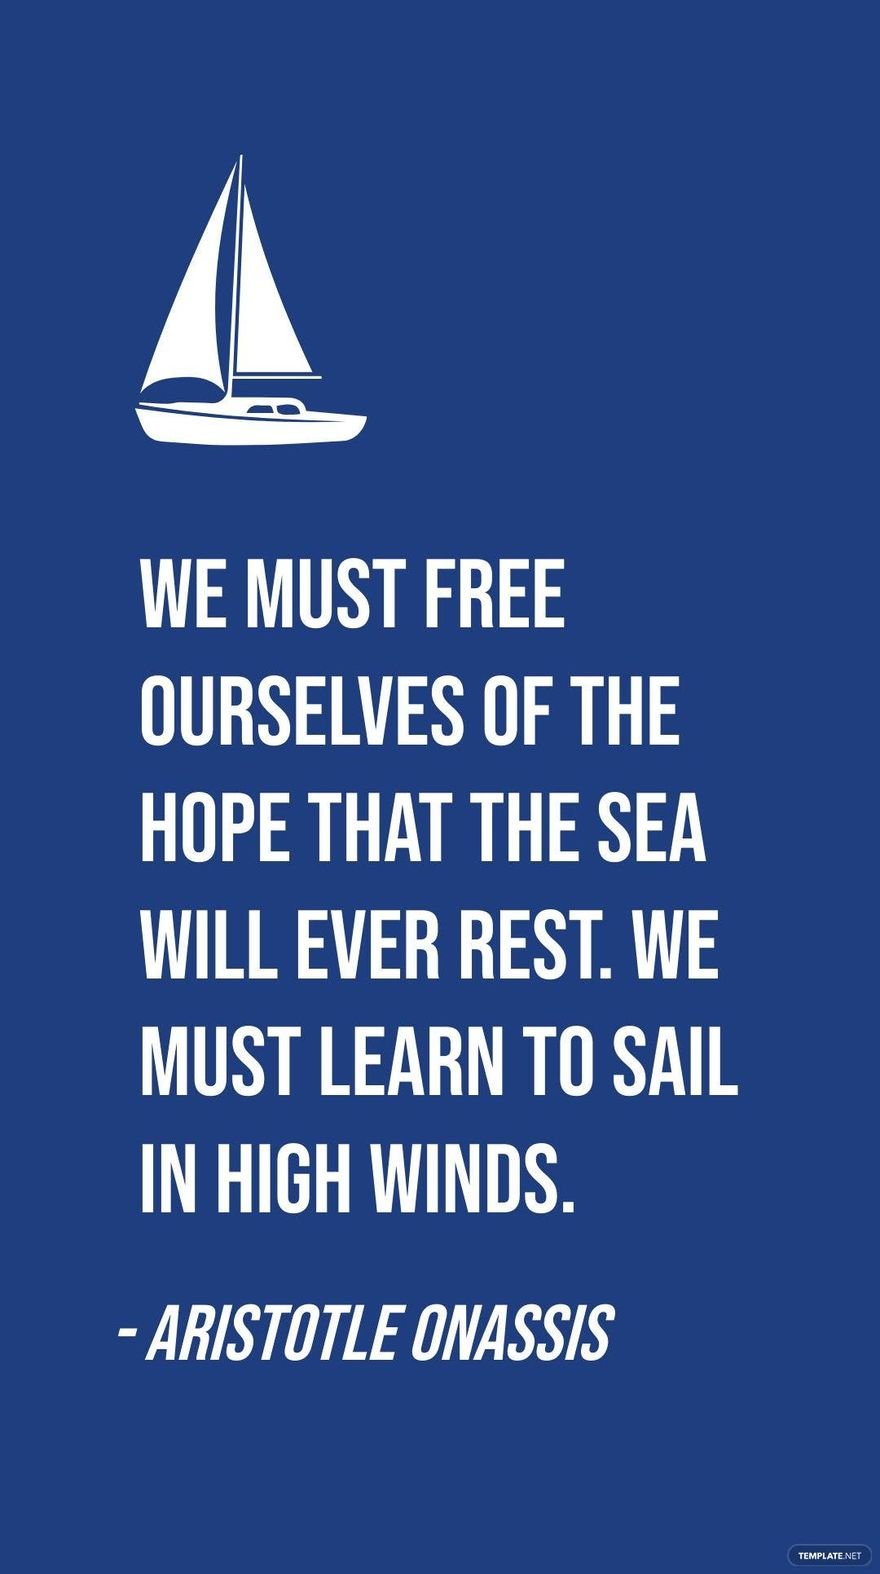 Free Aristotle Onassis - We must ourselves of the hope that the sea will ever rest. We must learn to sail in high winds. in JPG